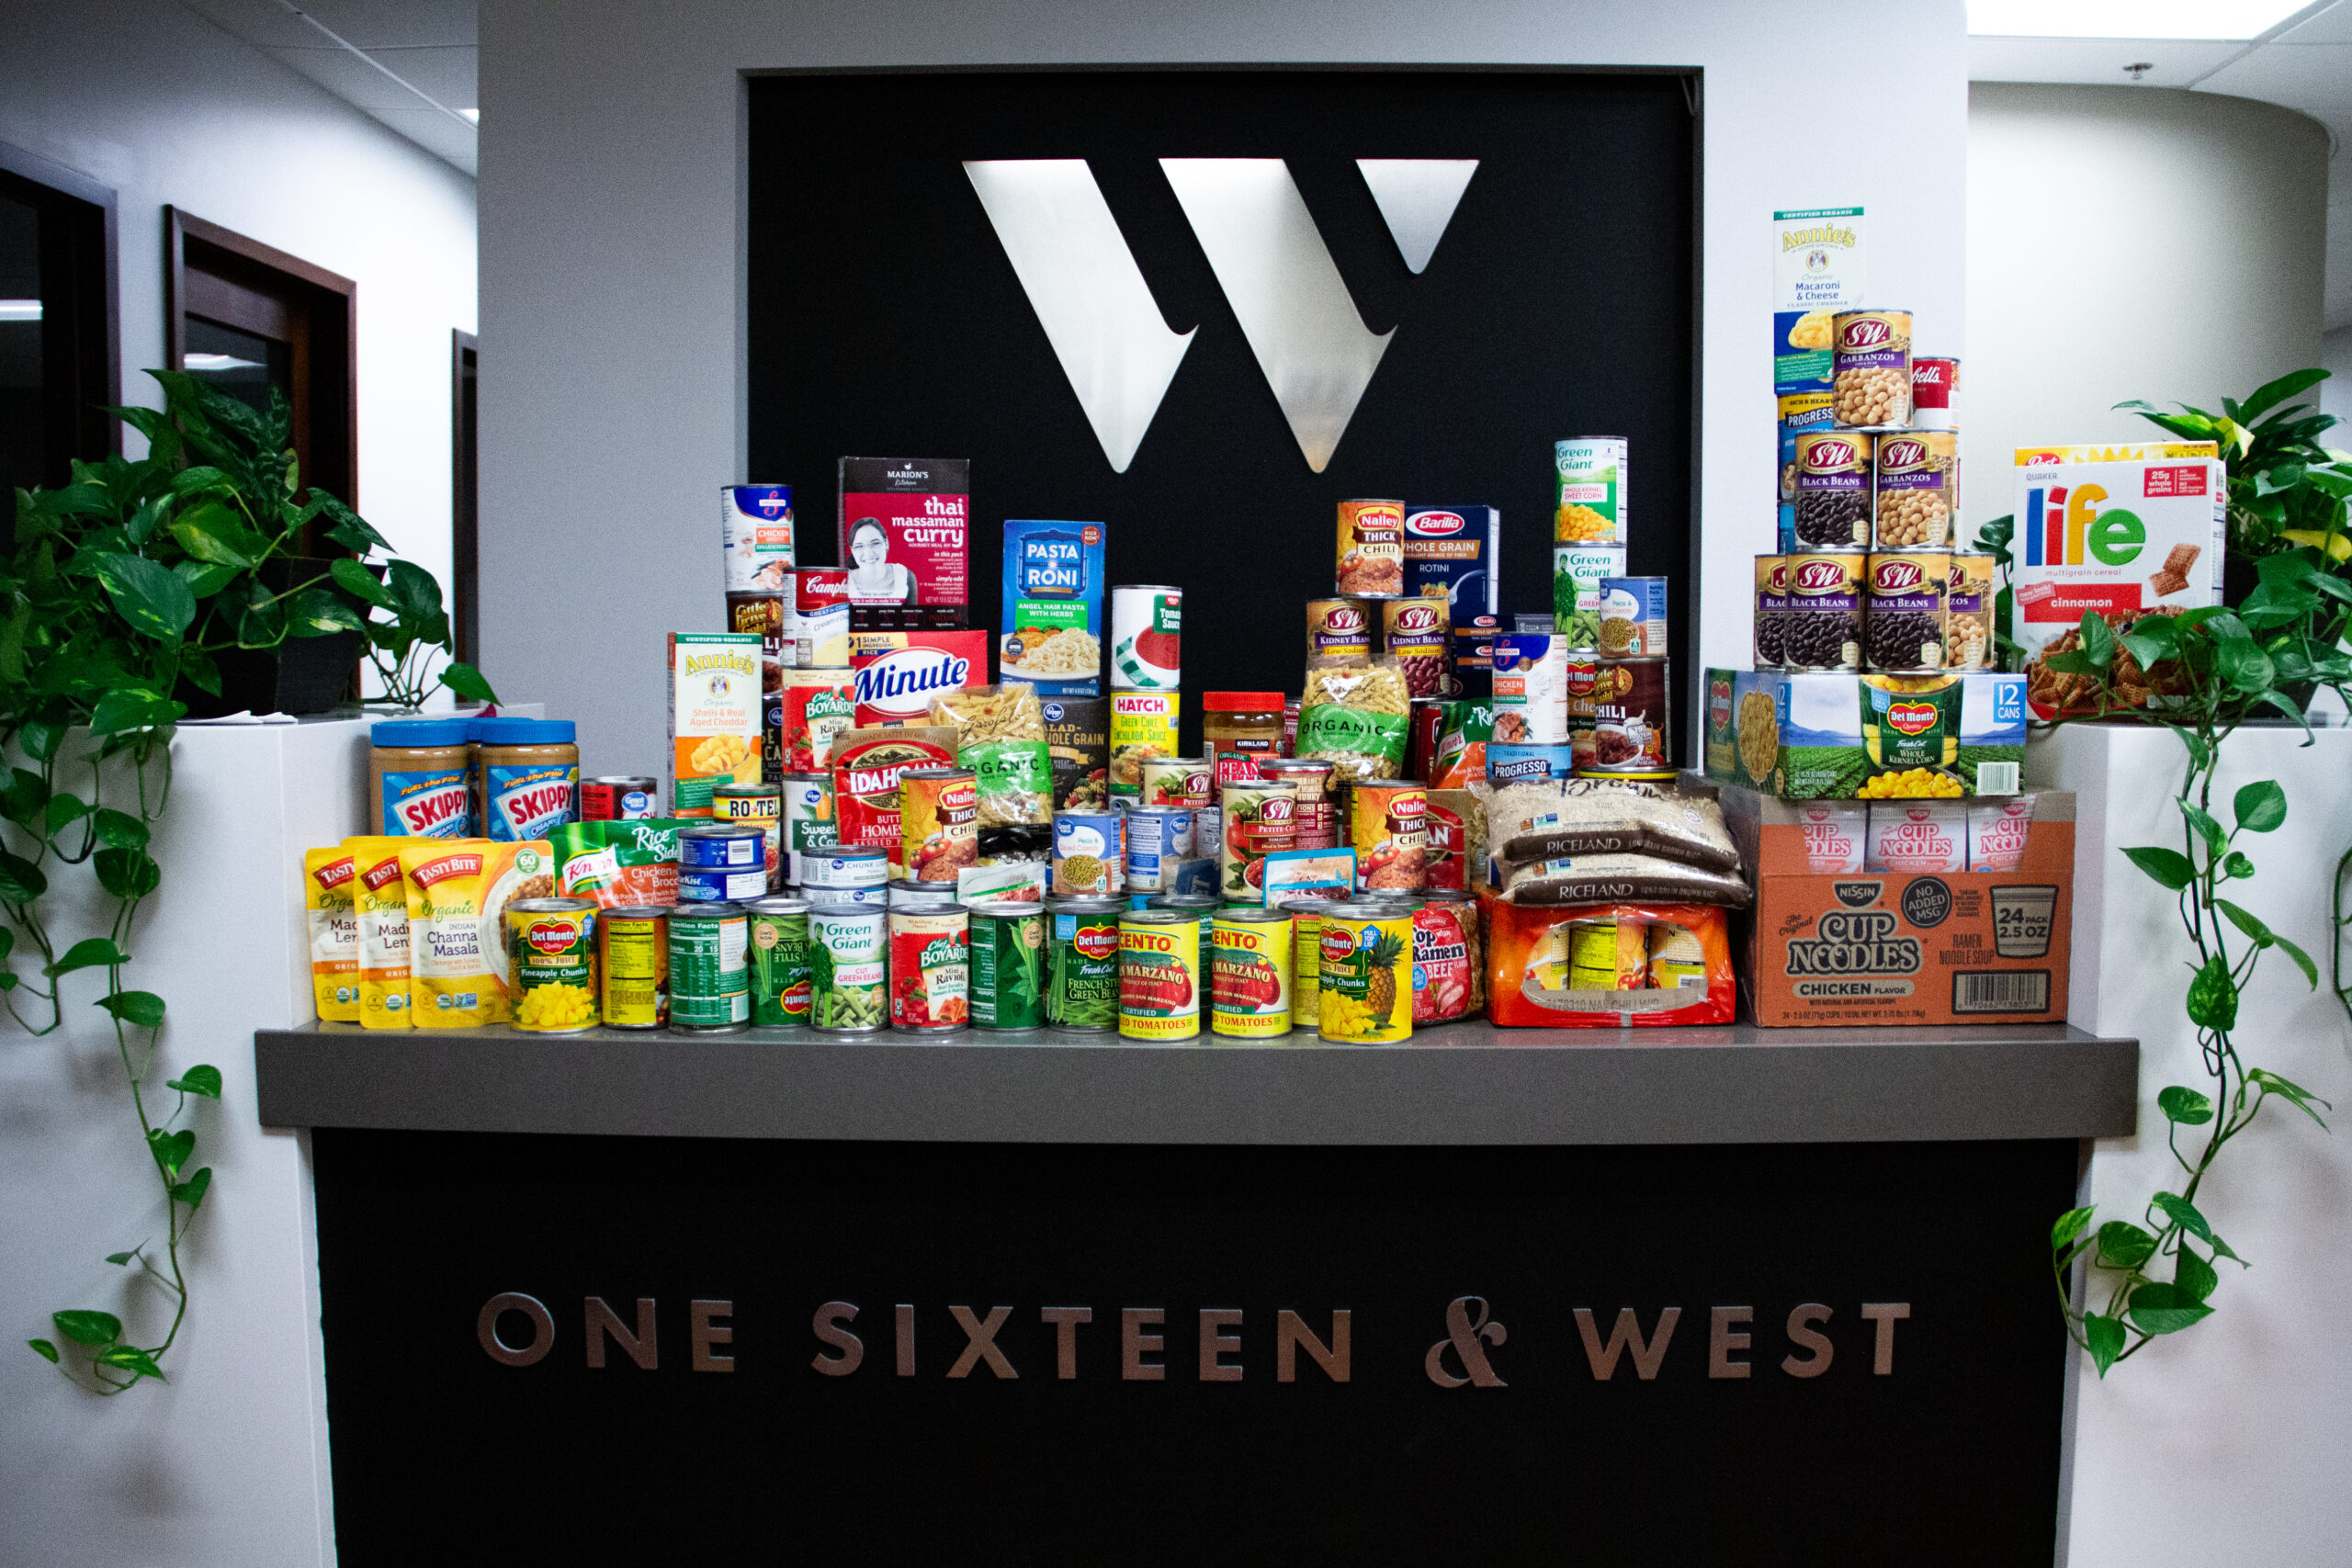 Photo of 116 & West's canned food drive. The front desk of the agency is stacked with various canned an boxed foods.